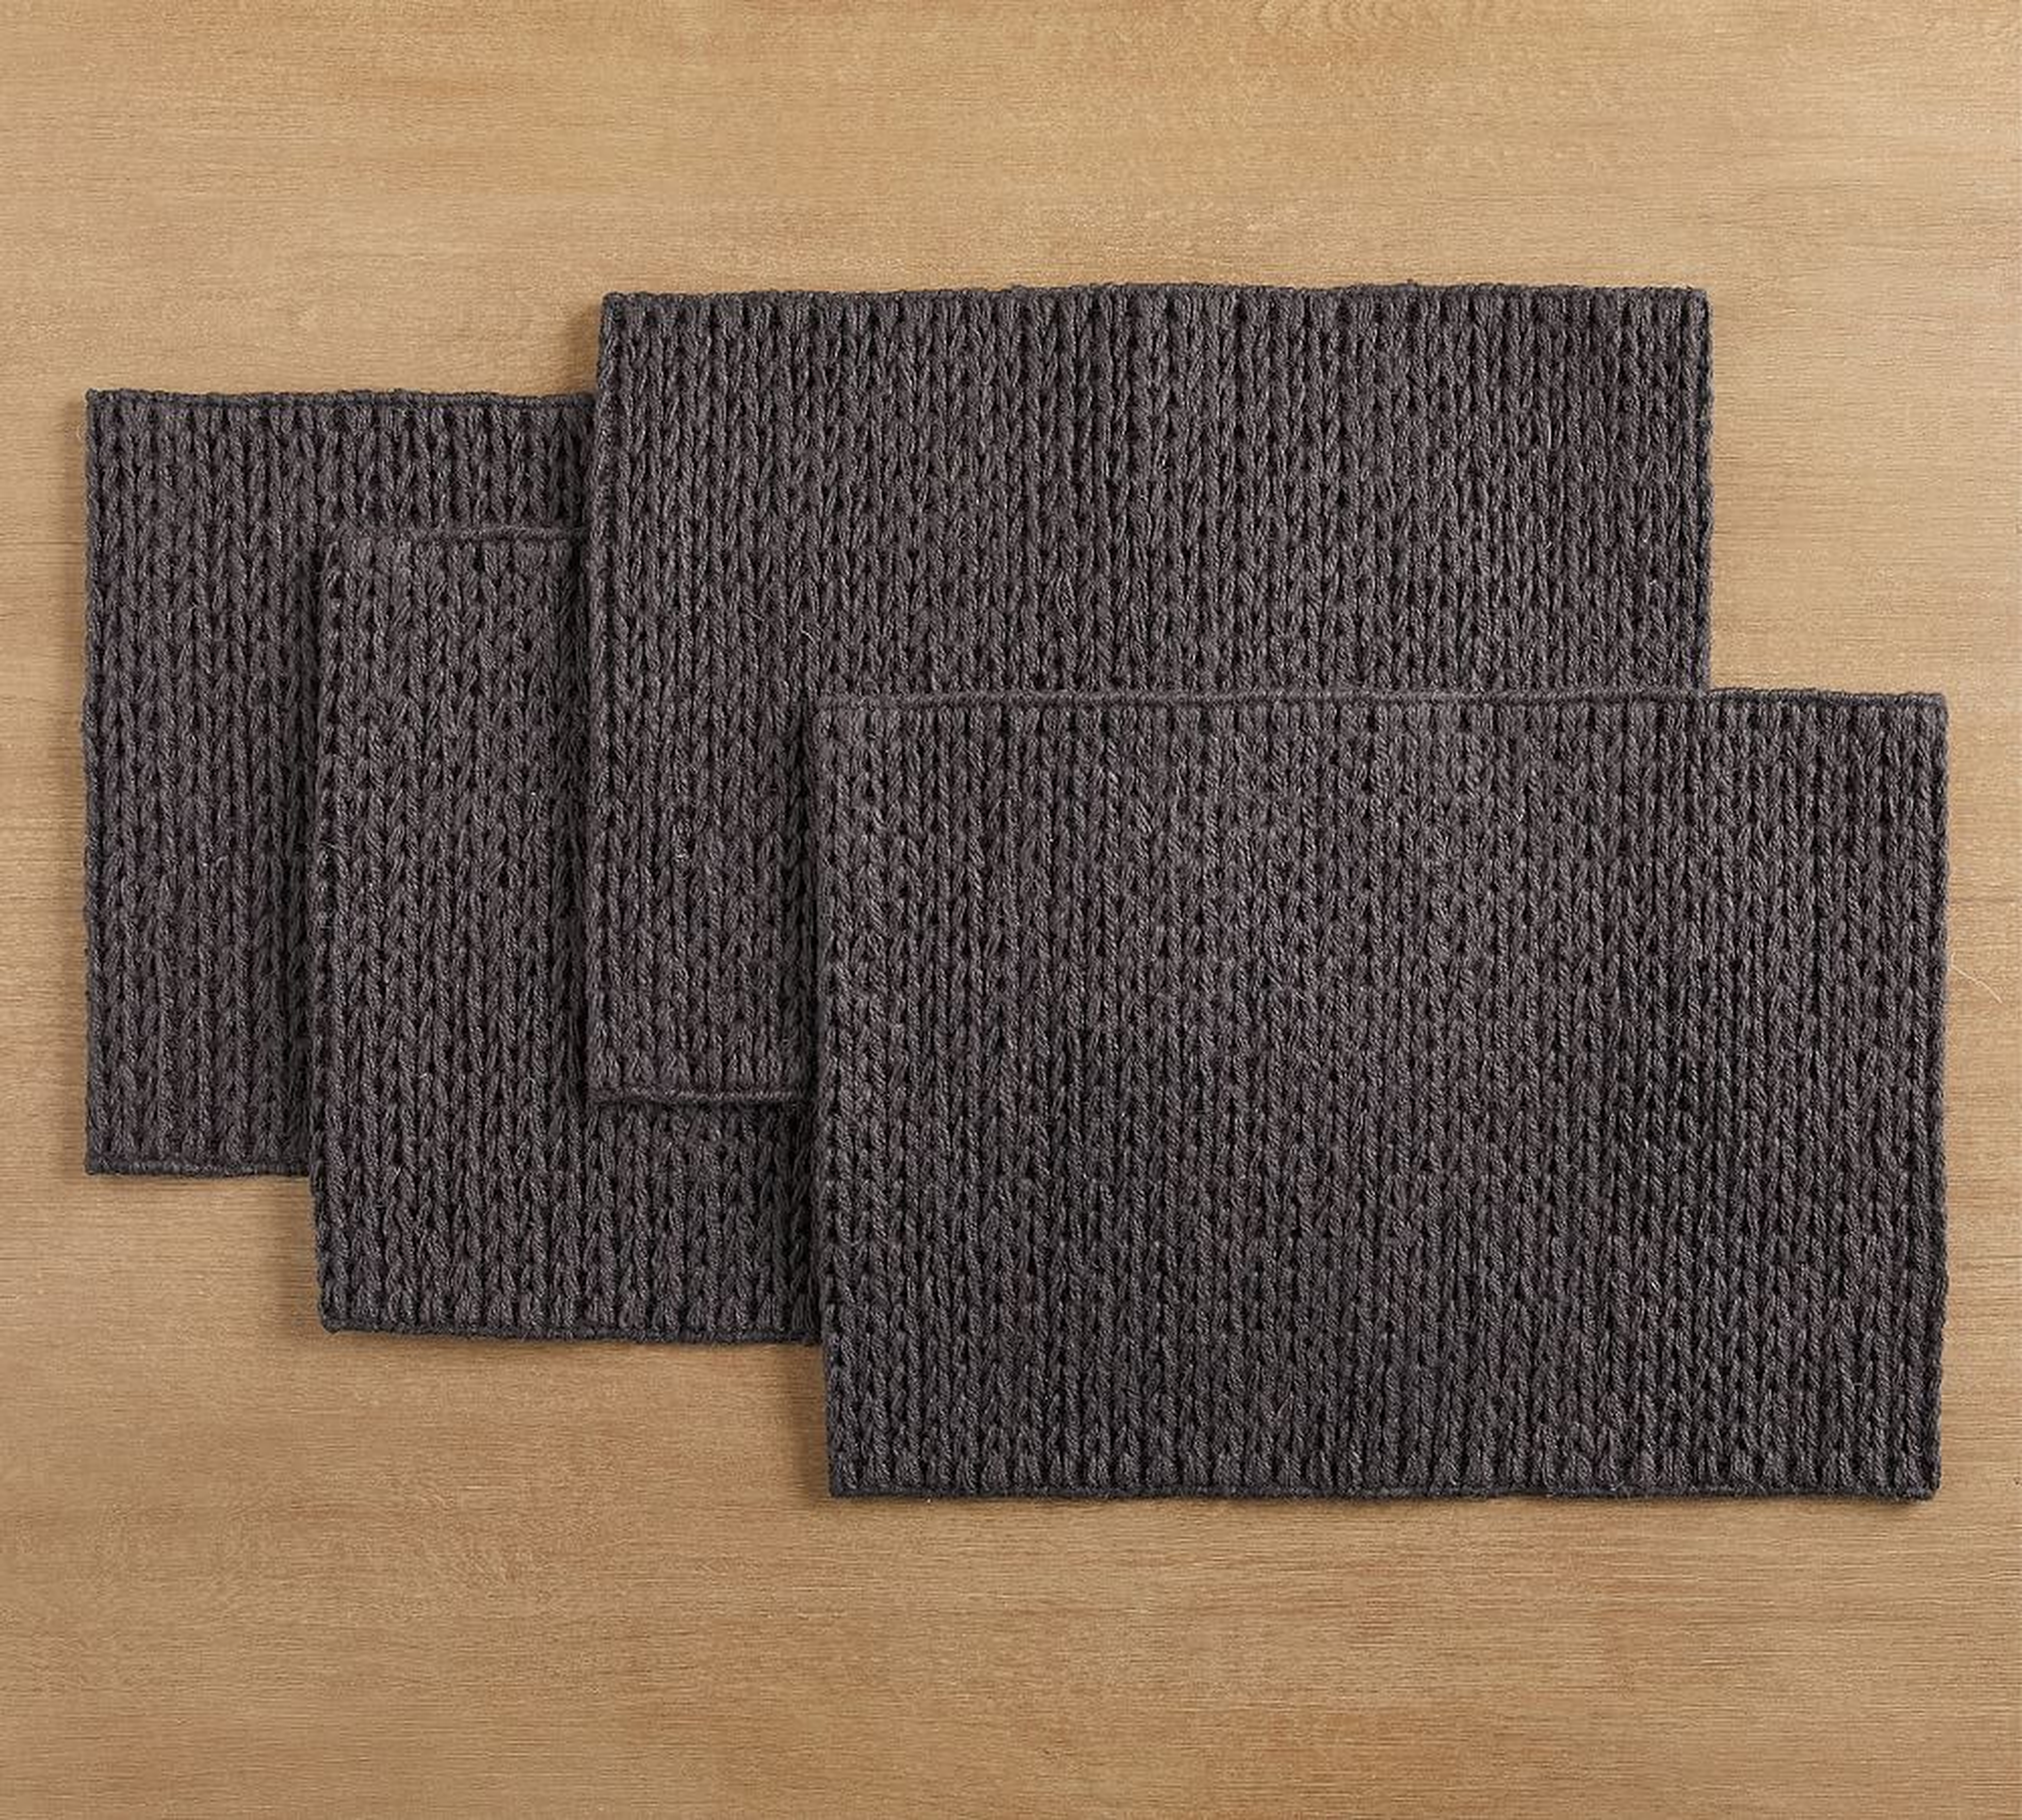 Handwoven Jute Placemats, Set of 4 - Charcoal - Pottery Barn